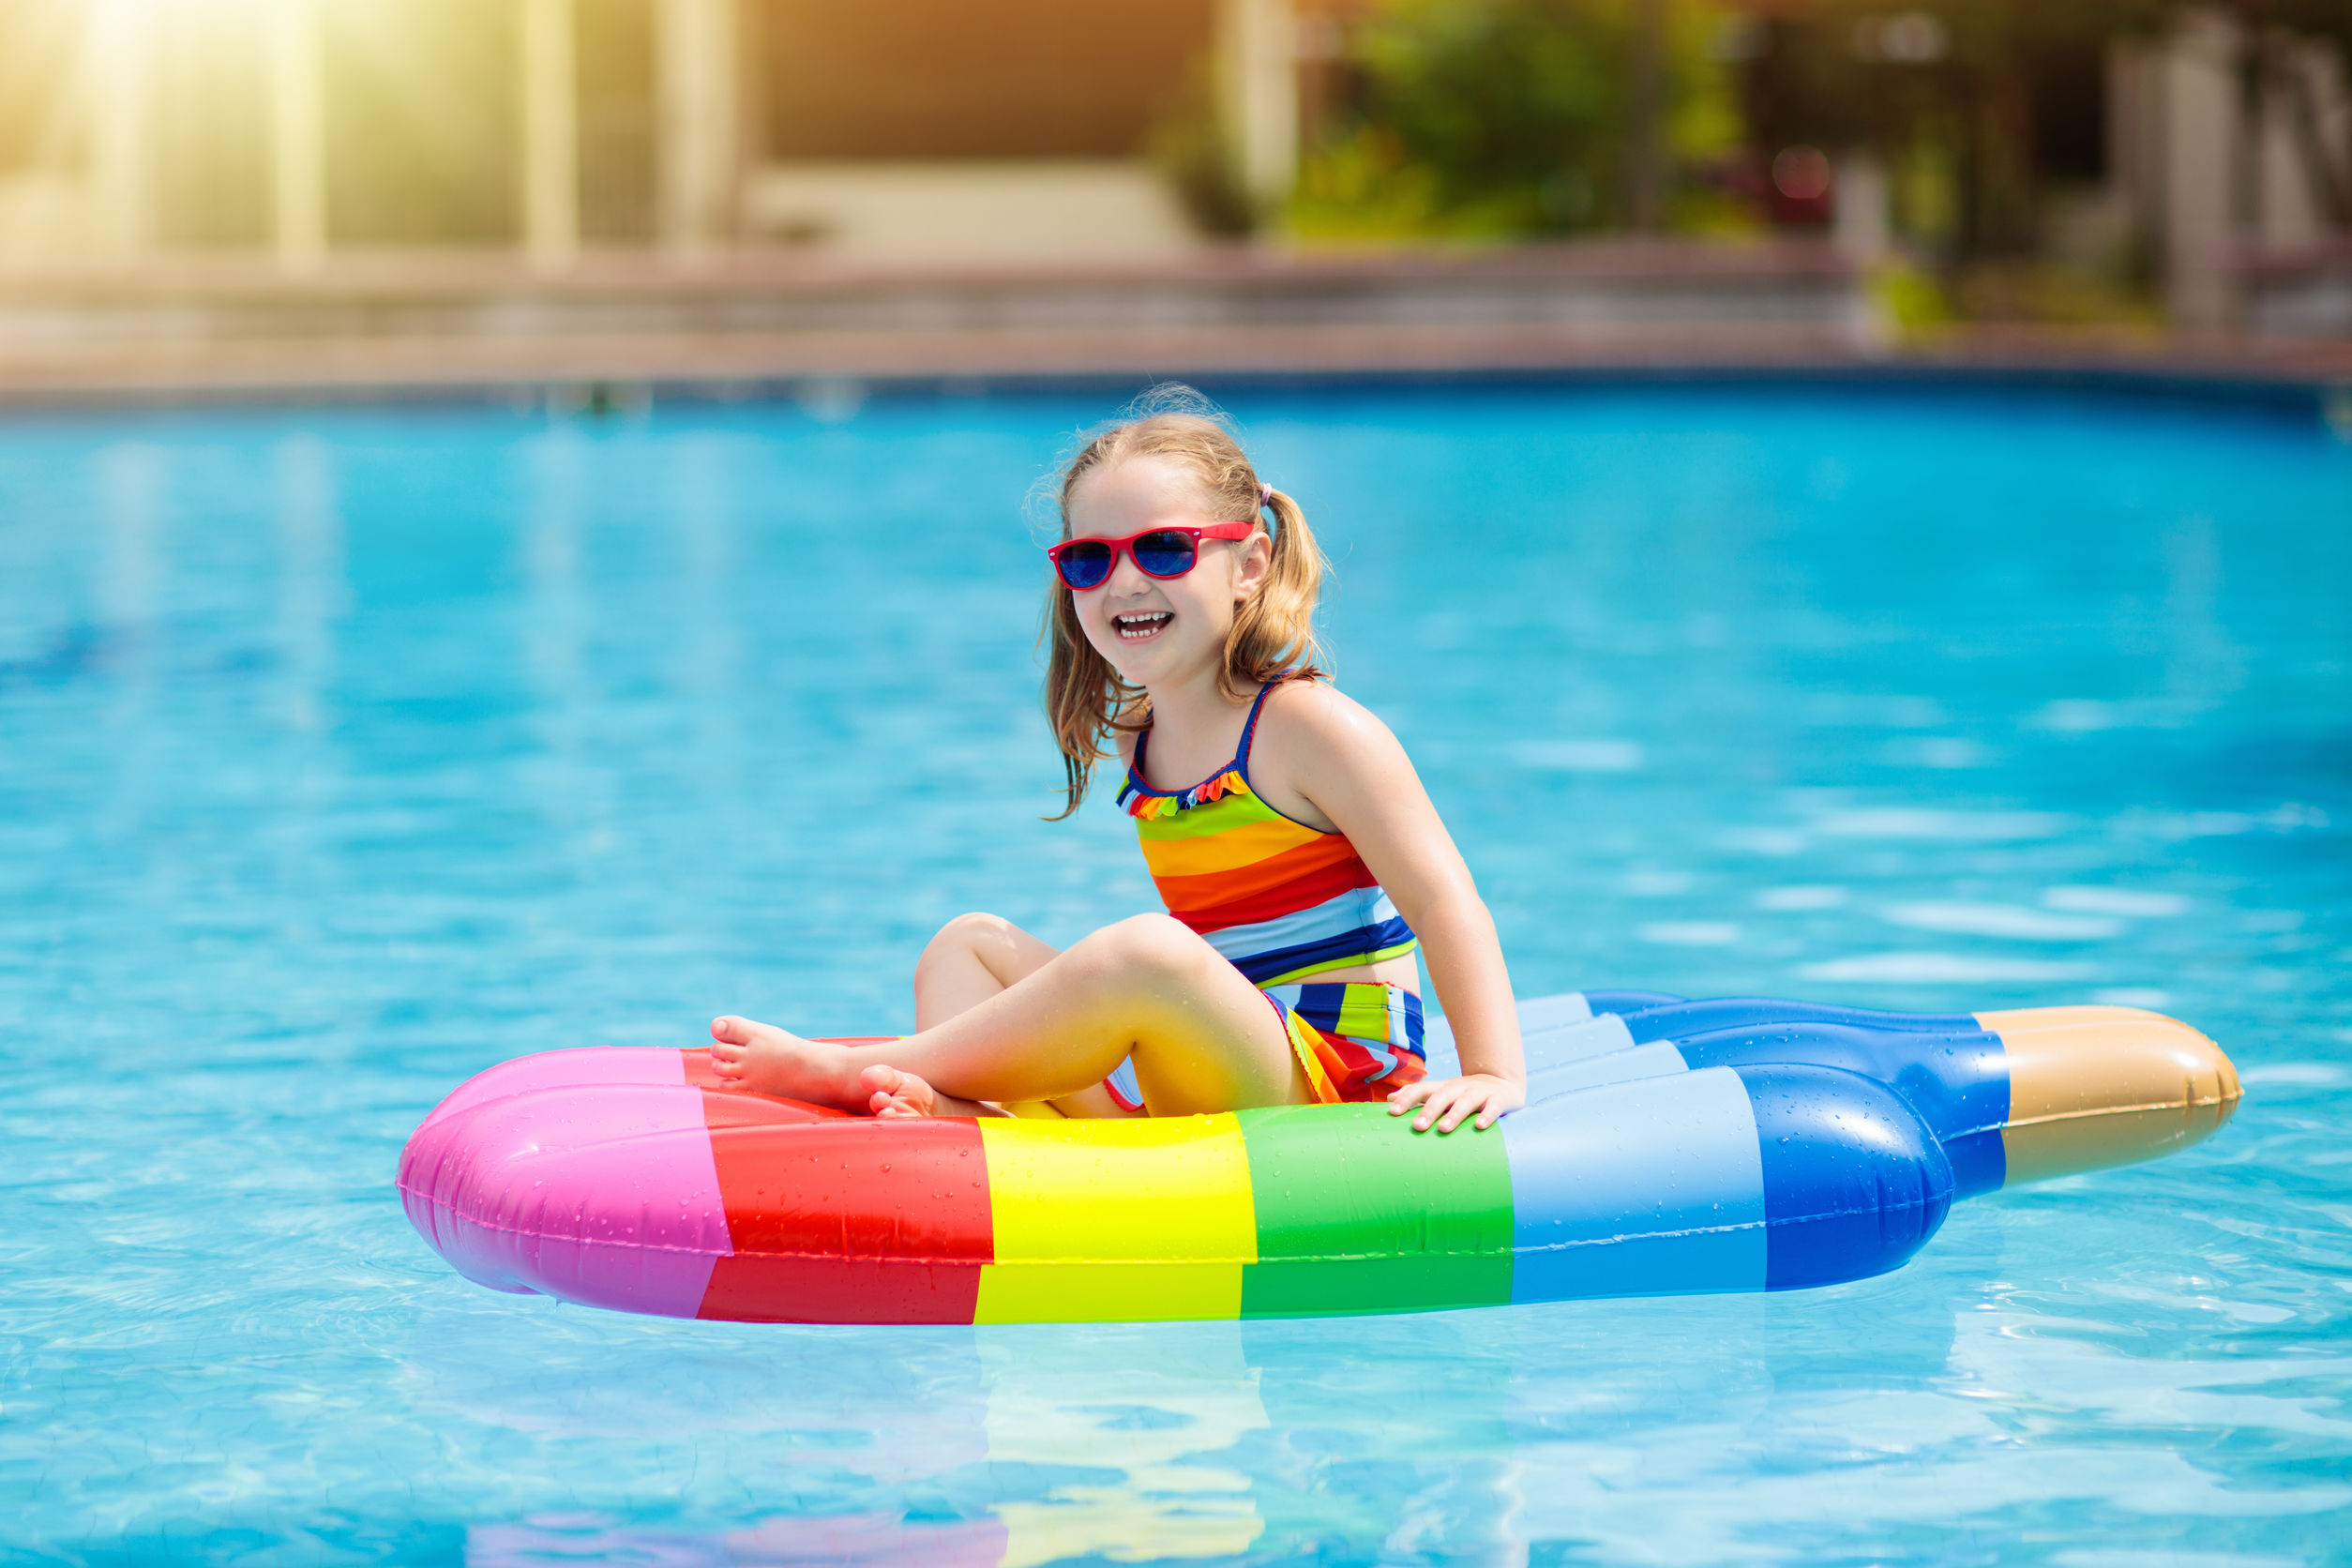 cool pool floats for kids